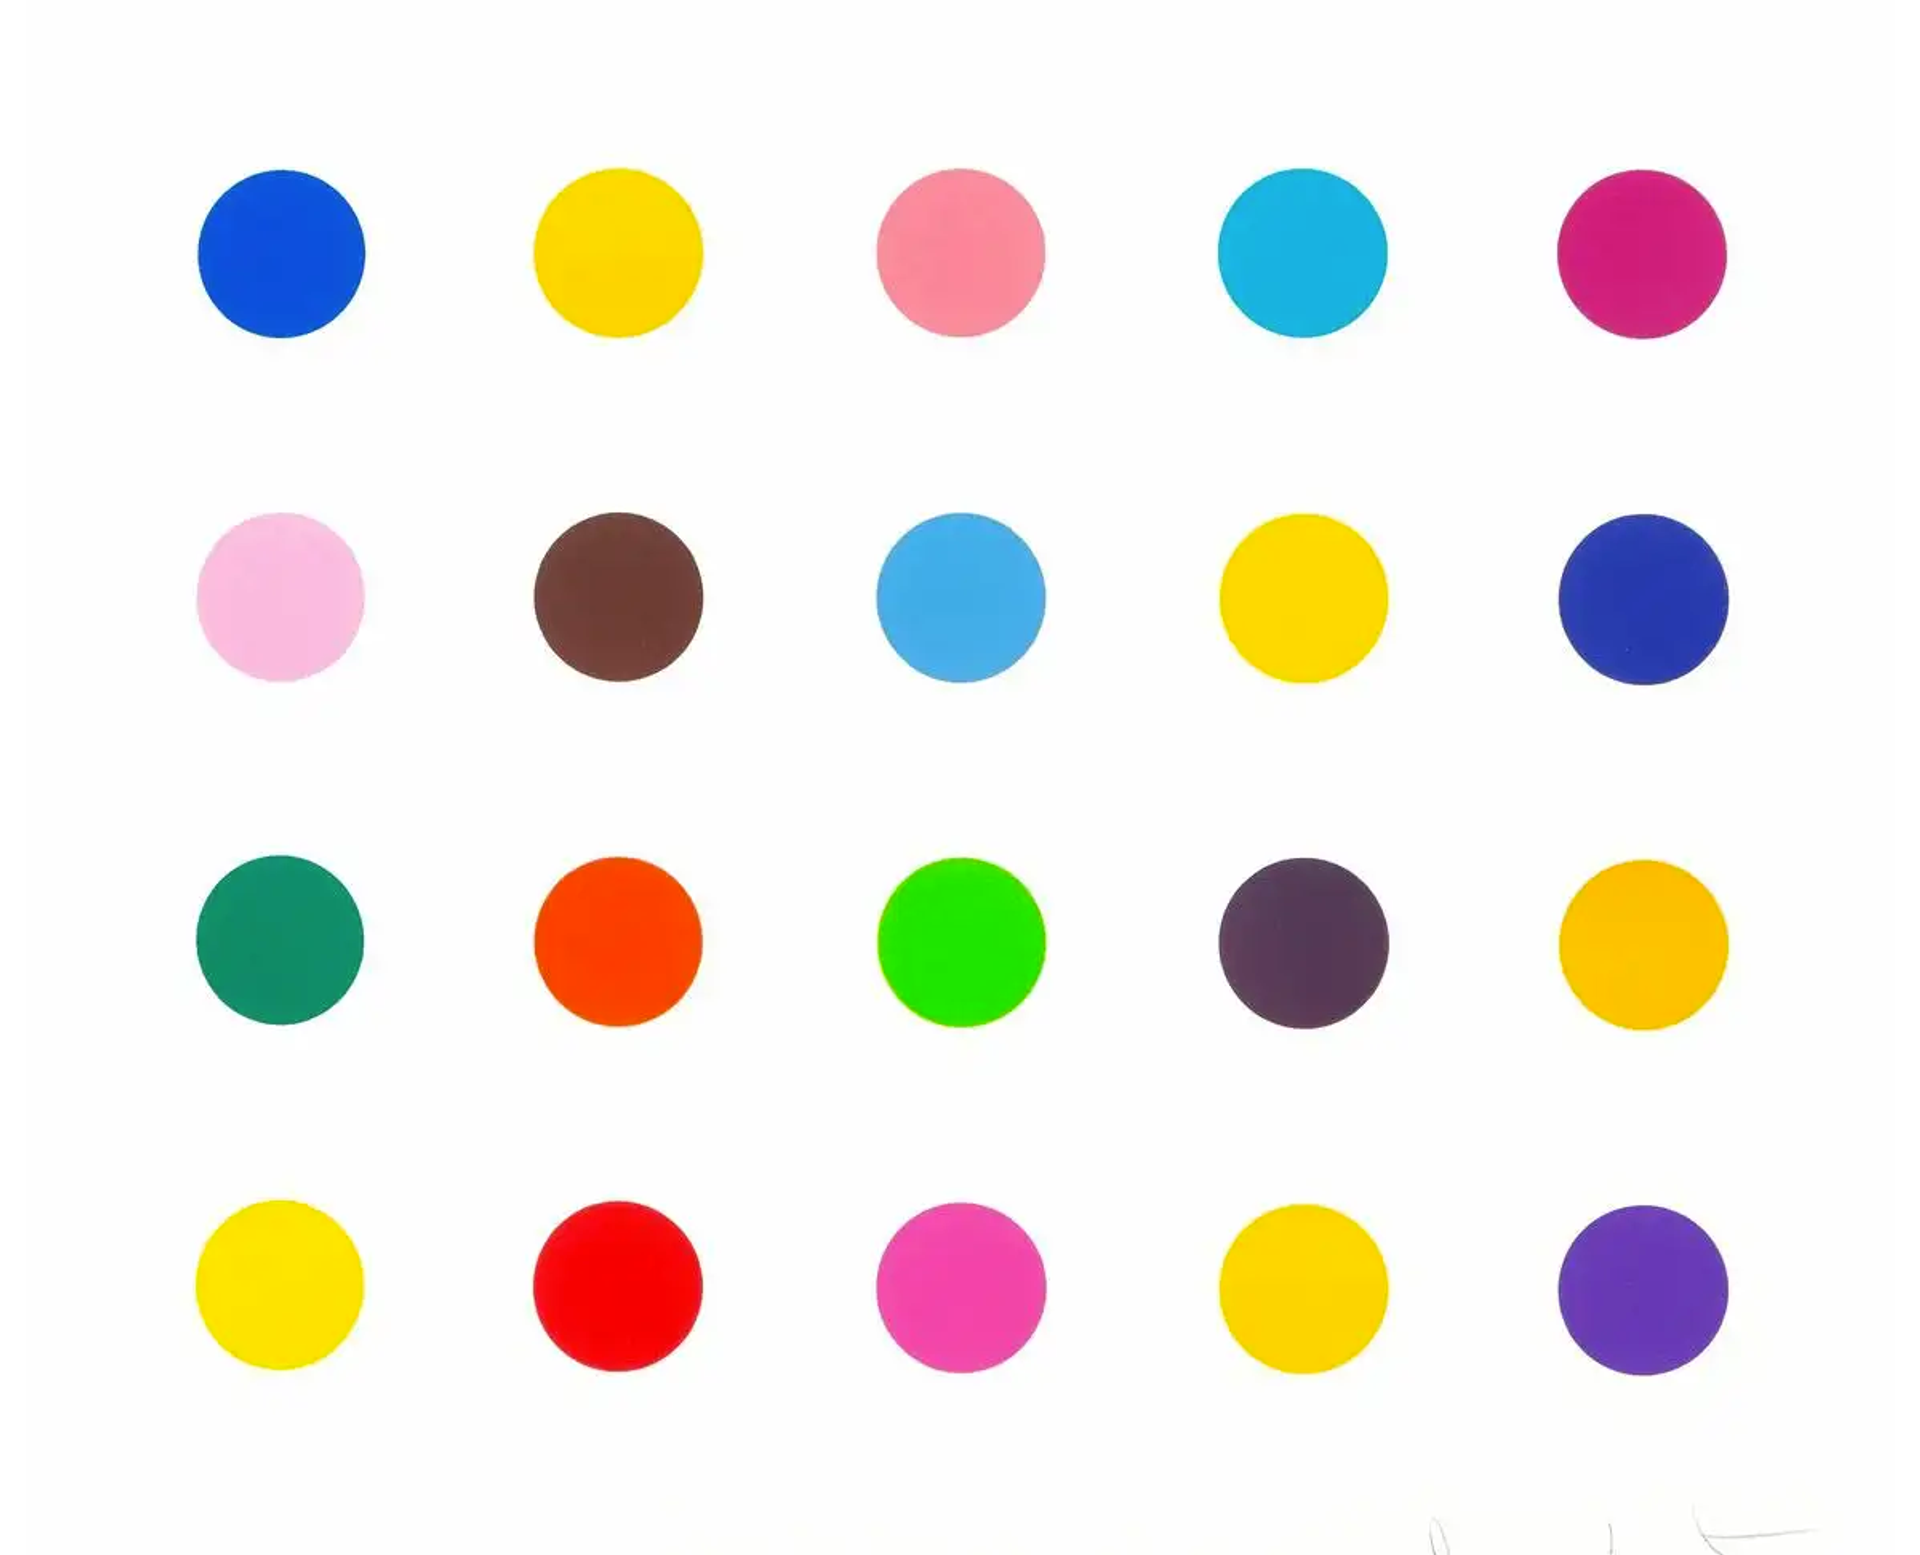 amien Hirst’s Esculetin depicts twenty circles of colour placed in a grid on a white backdrop.